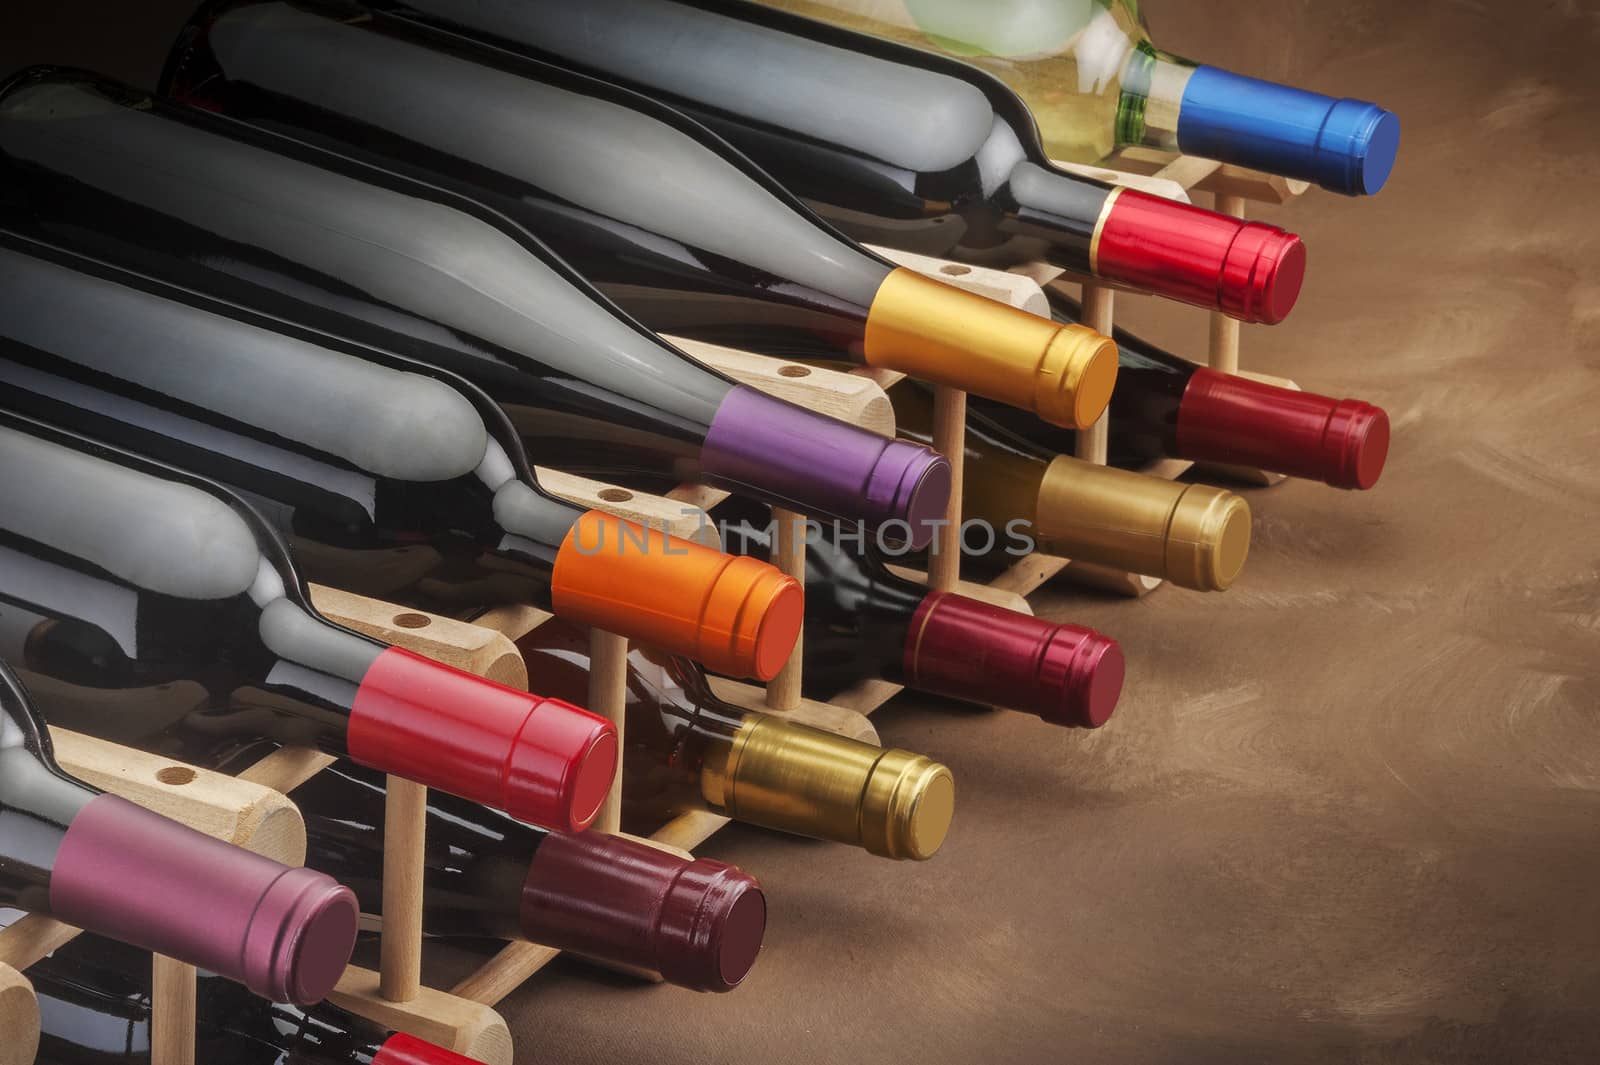 Wine bottles stacked on a wooden rack on a canvas background